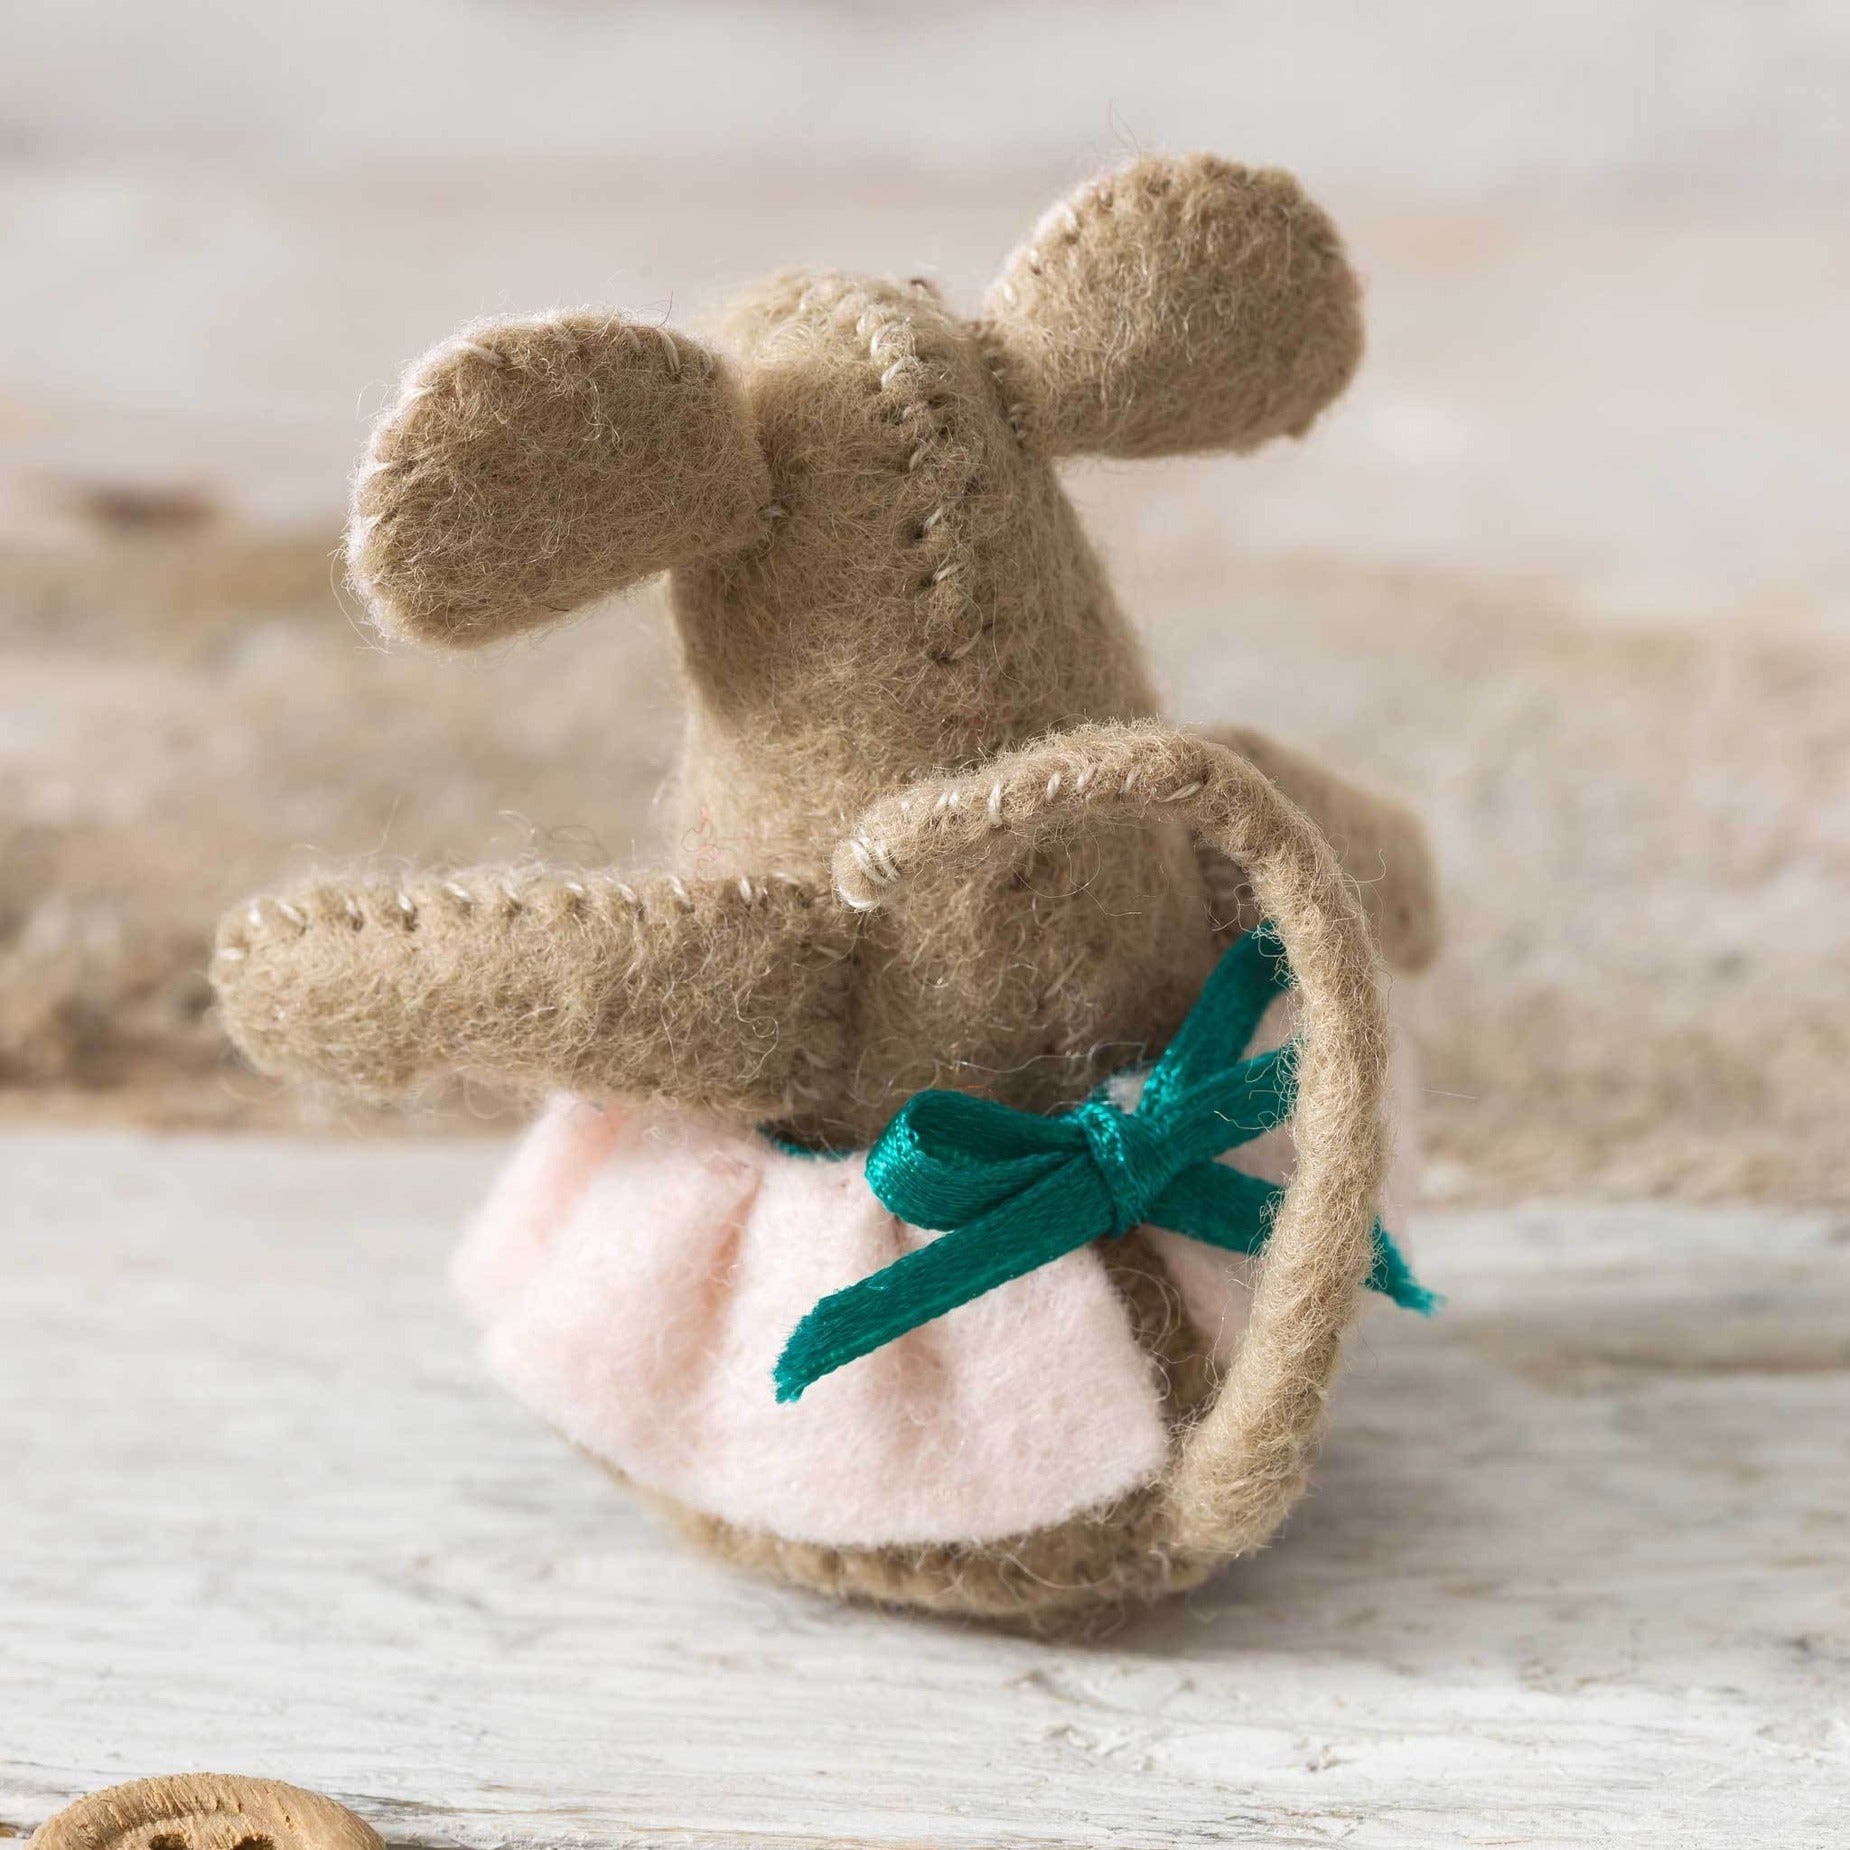 Felt Animal Families: Fabulous Little Felt Animals To Sew, With Clothes & Accessories [Book]